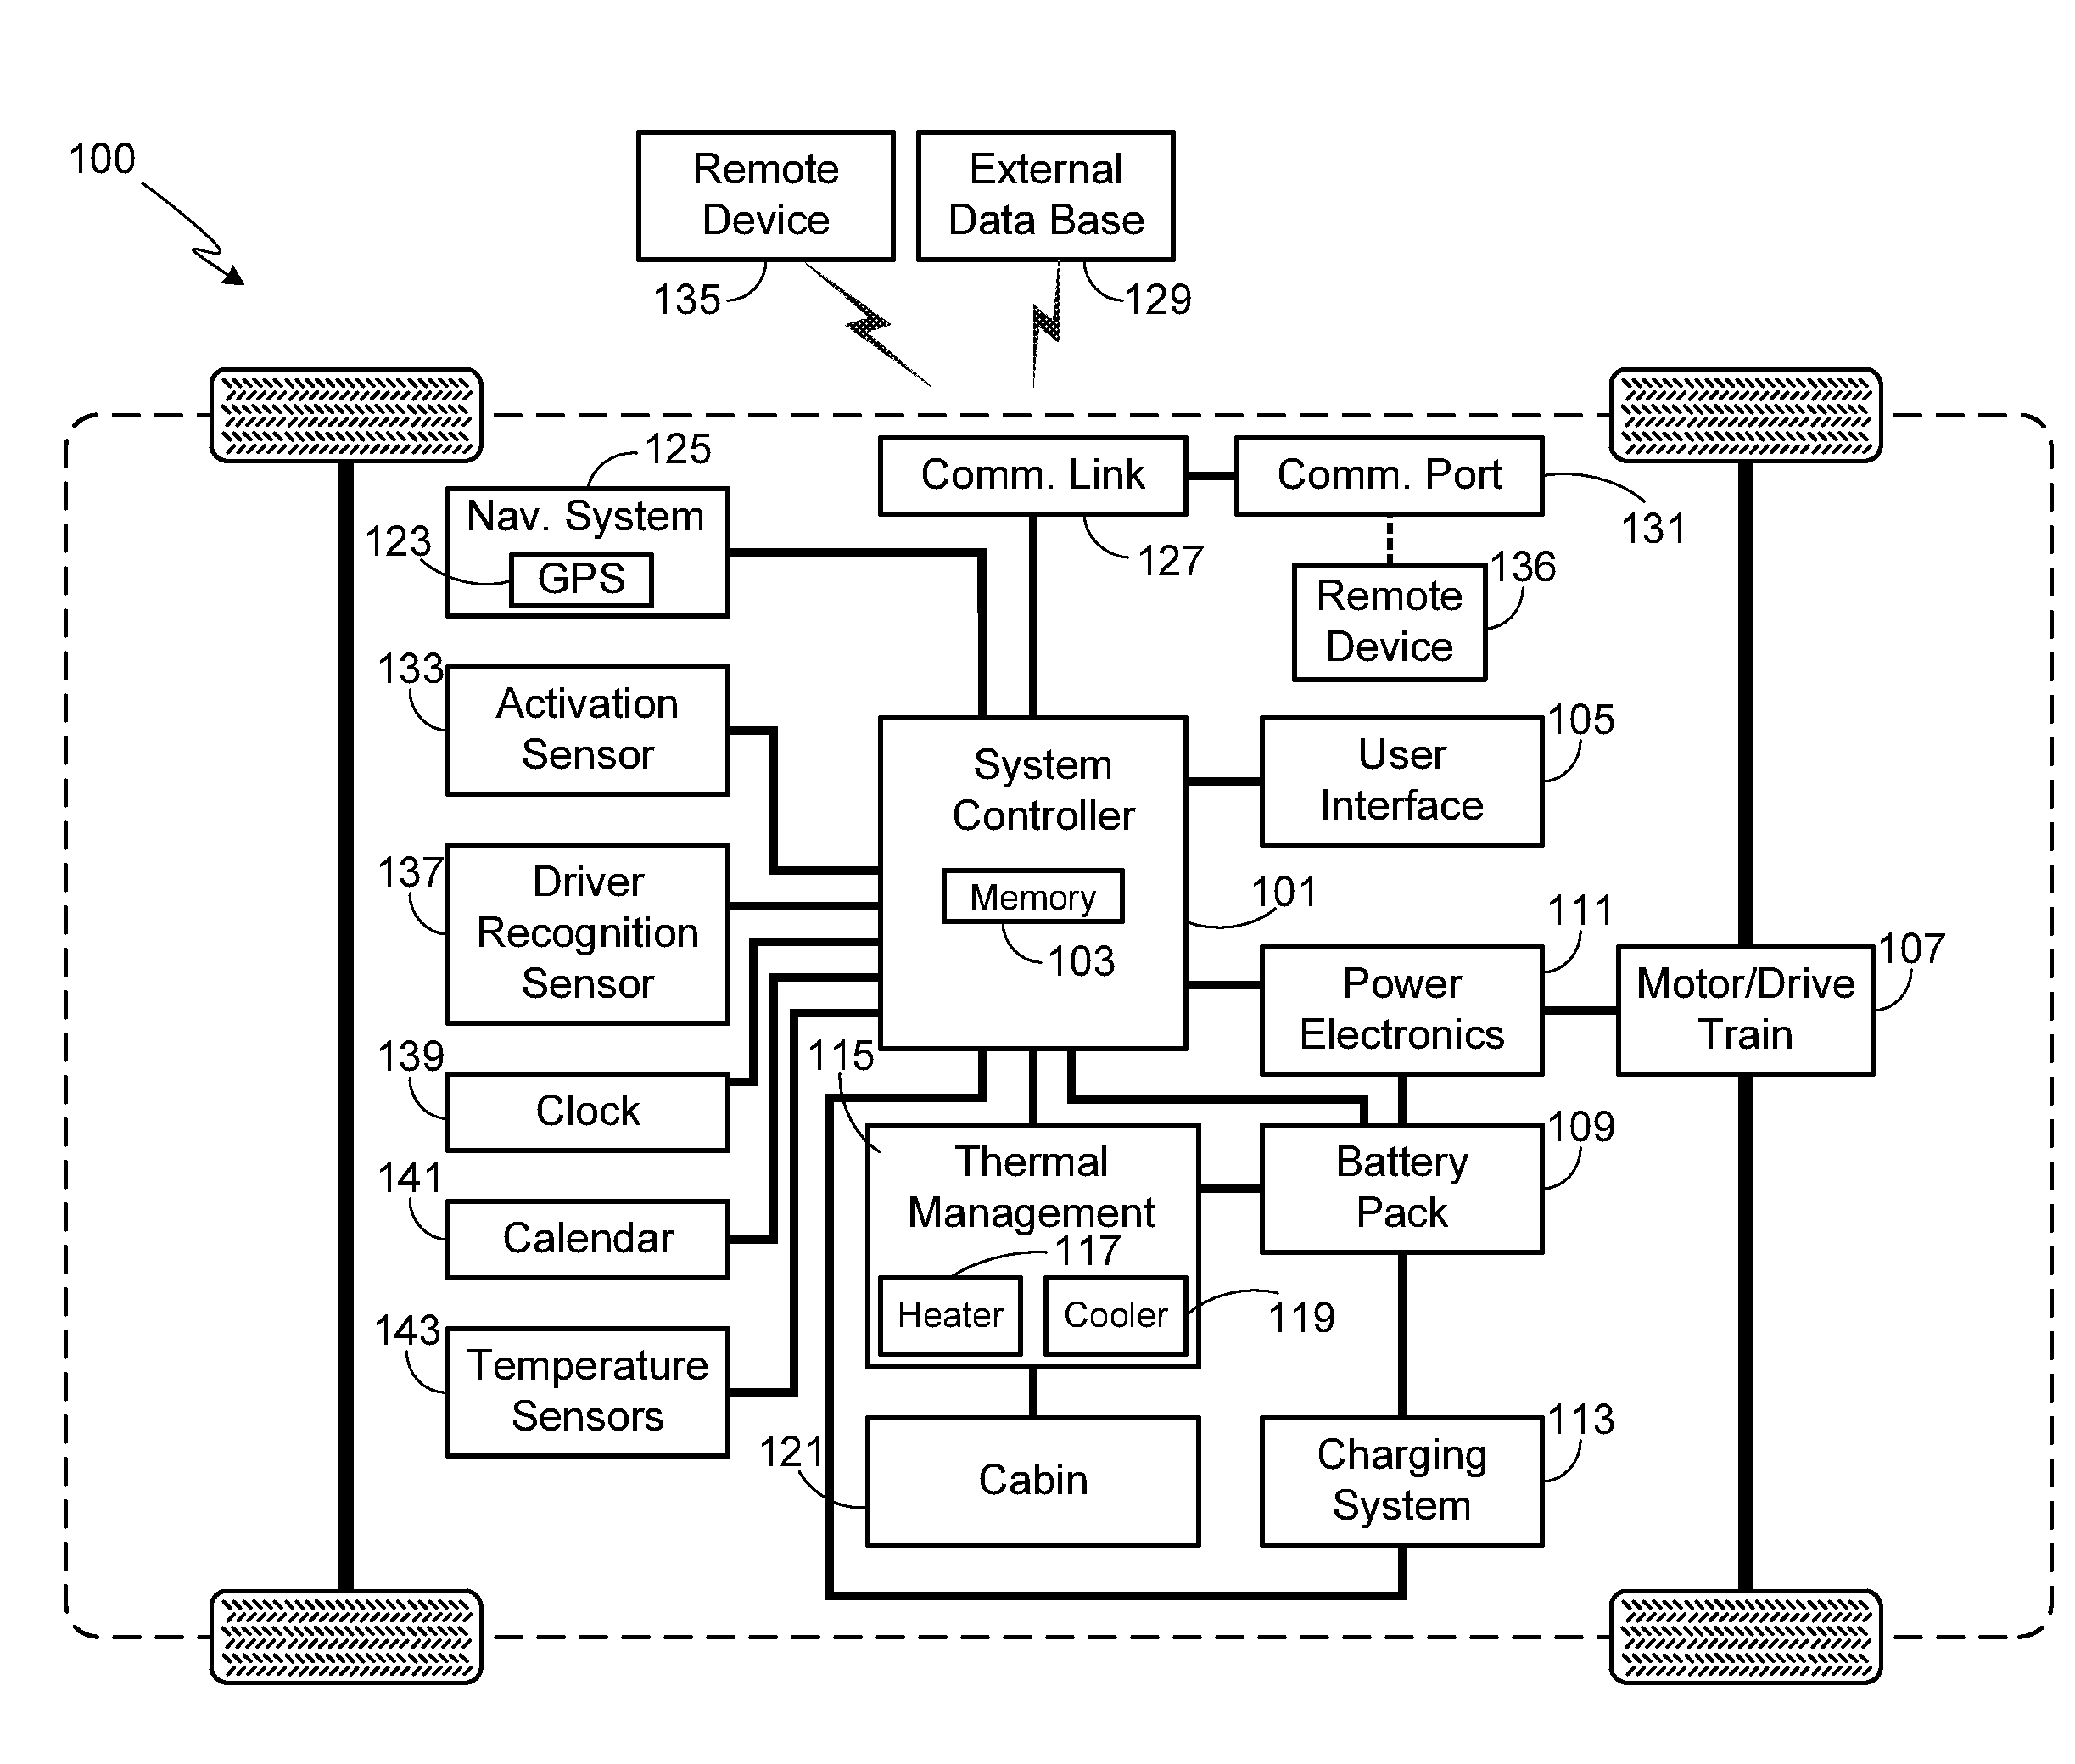 Method of Operating a Preemptive Vehicle Temperature Control System